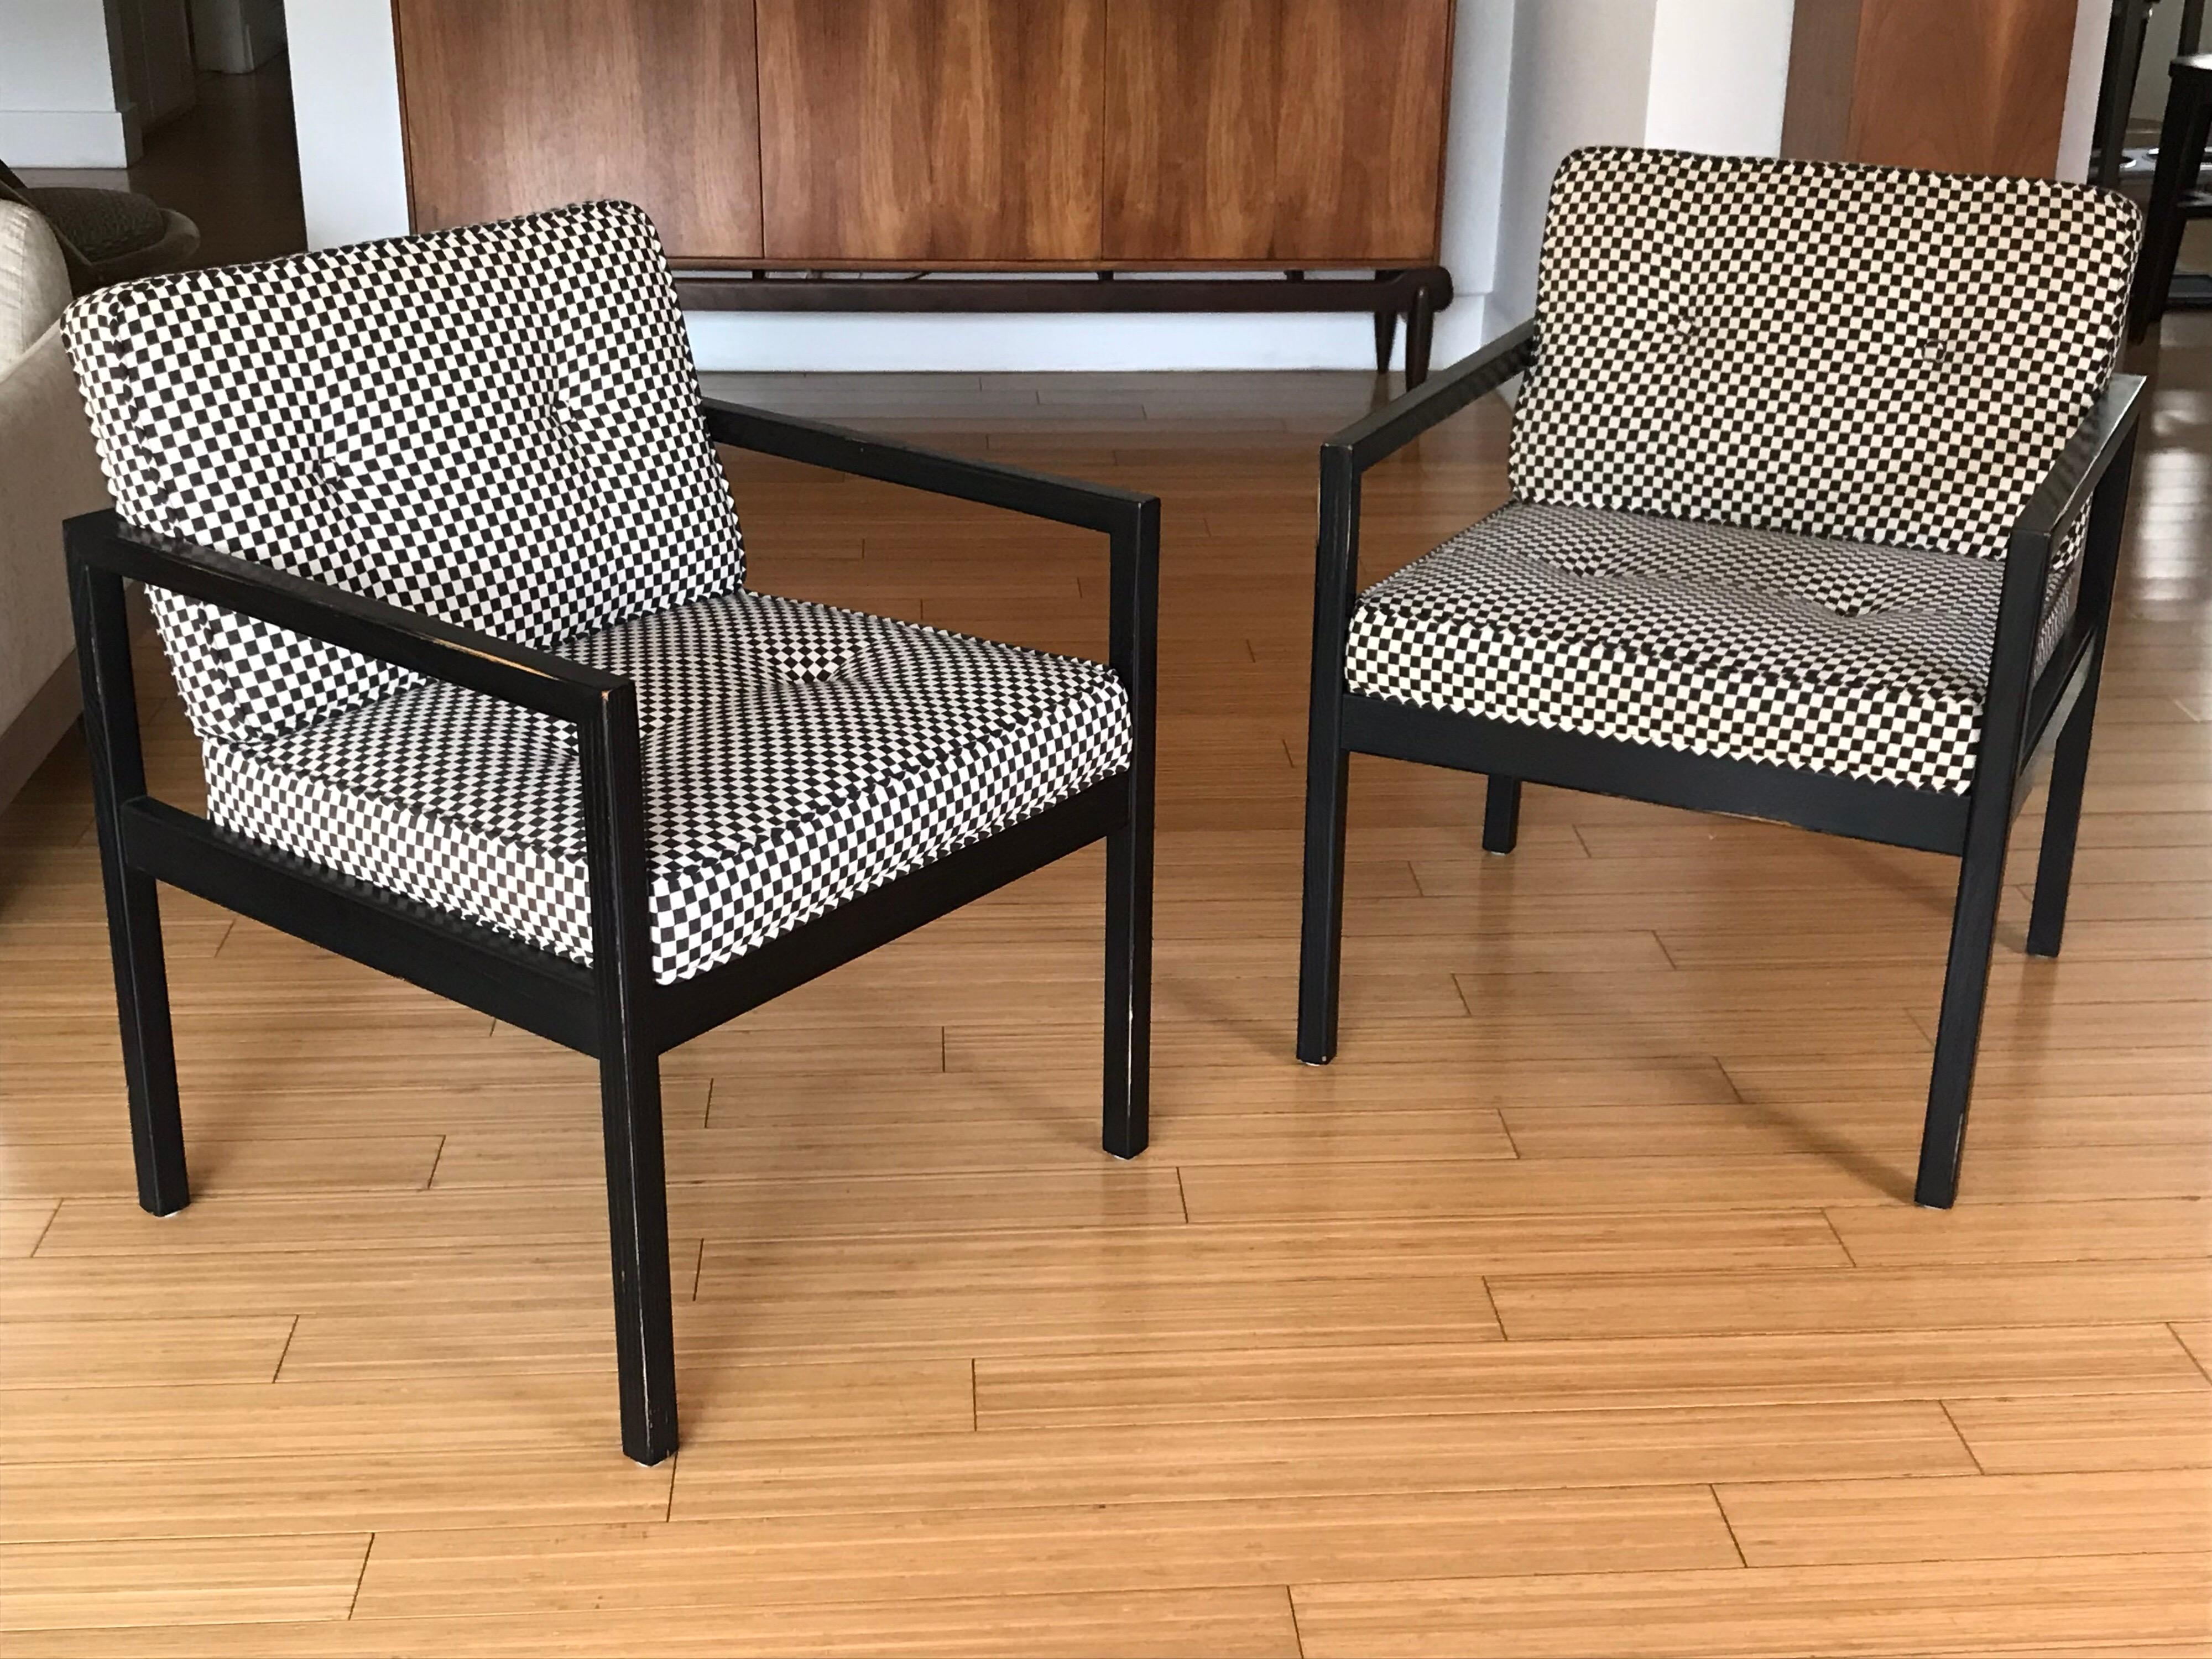 American George Nelson Architectural Wood Frame Chairs with Alexander Girard Fabric